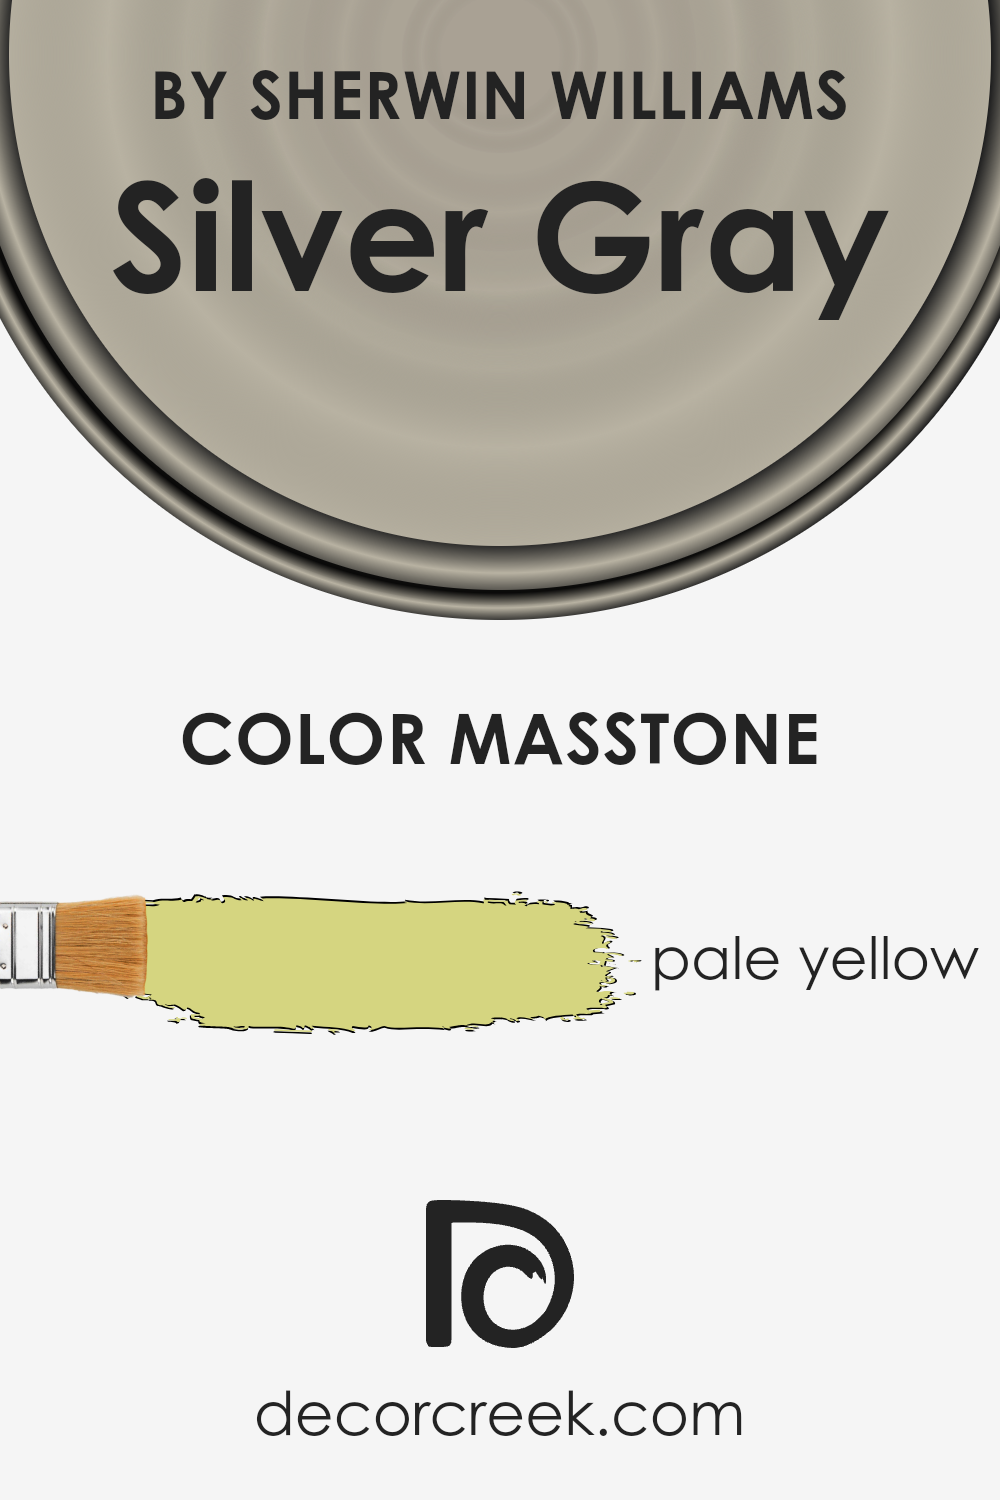 what_is_the_masstone_of_silver_gray_sw_0049